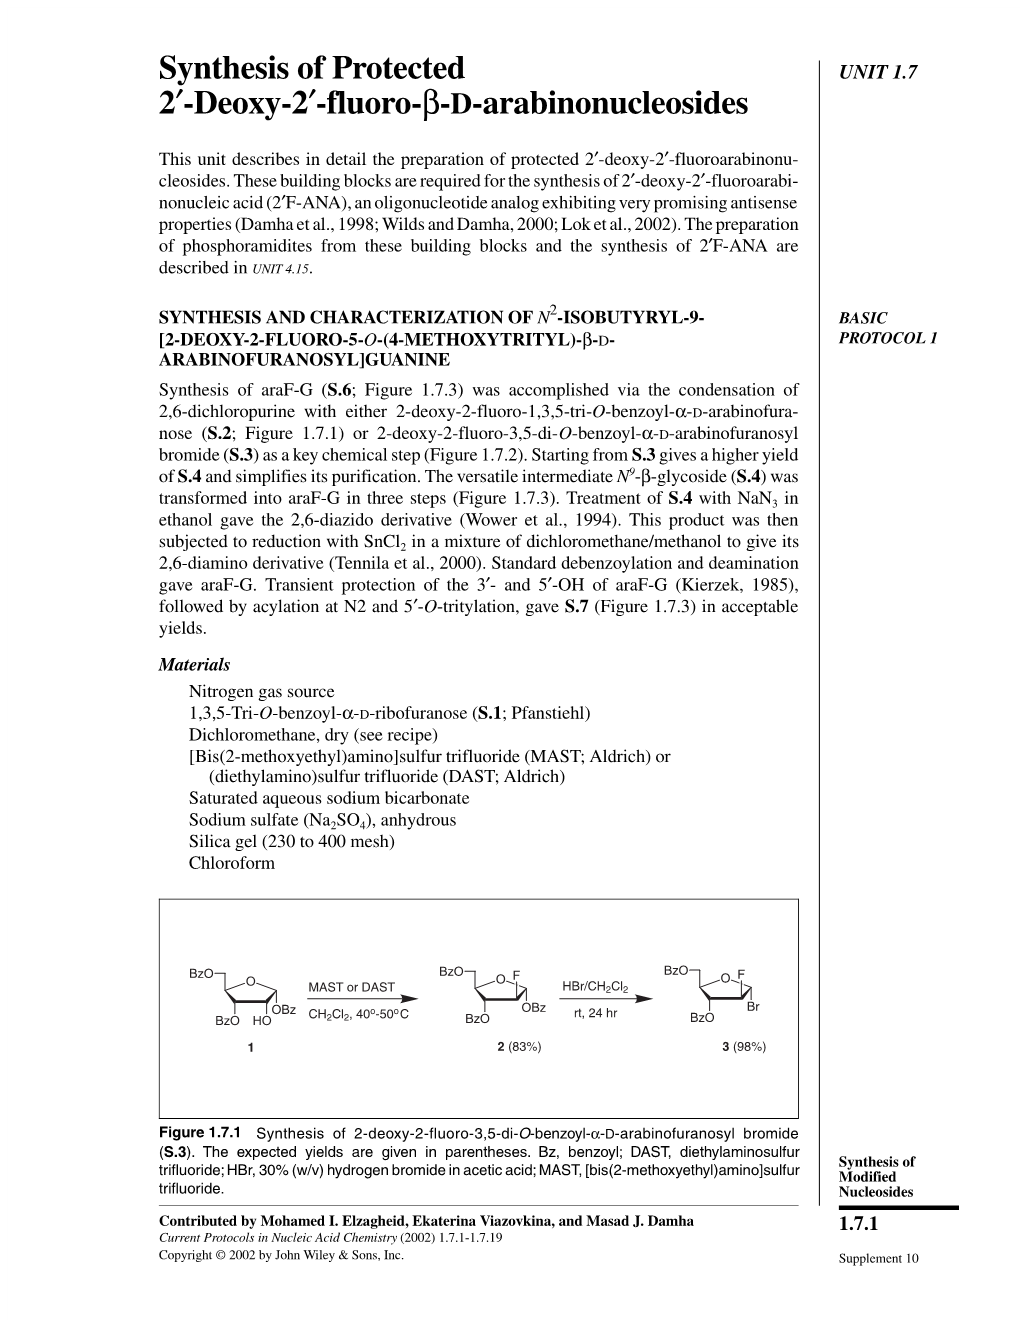 Synthesis of Protected 2′-Deoxy-2′-Fluoro-Β-D-Arabinonucleosides